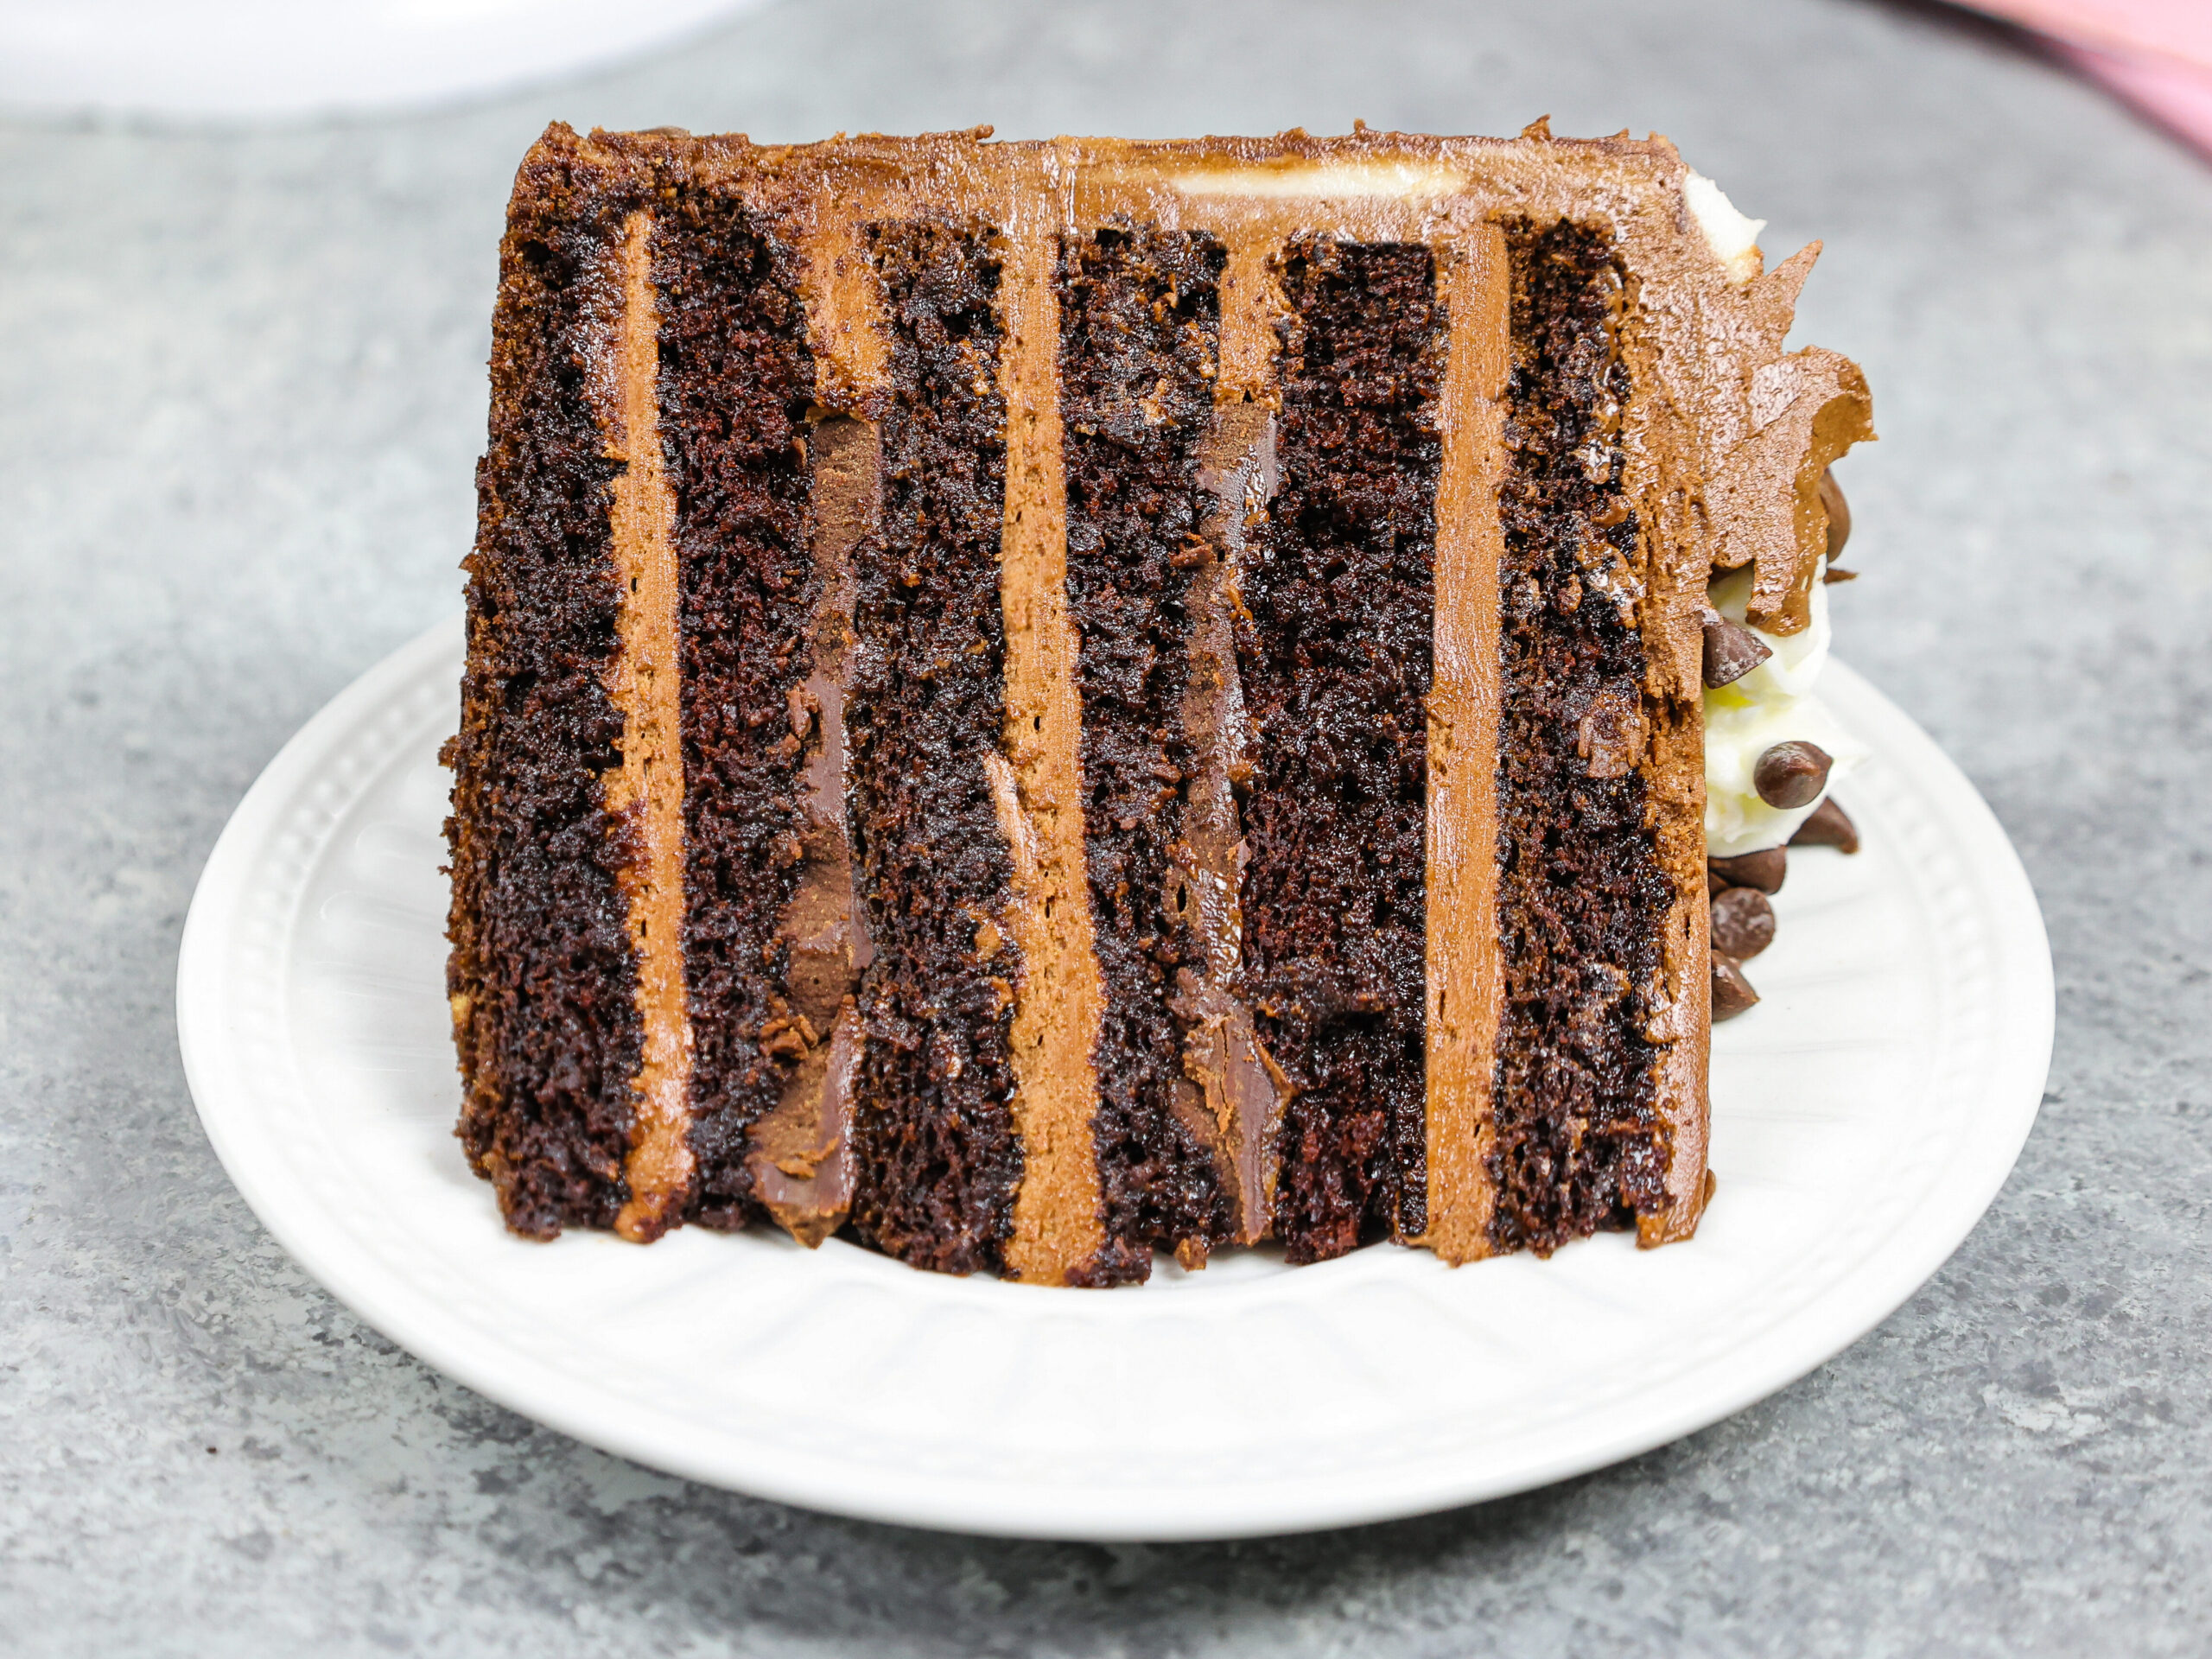 image of a triple chocolate cake slice that's filled with milk chocolate buttercream and dark chocolate ganache, and soaked with chocolate simple syrup